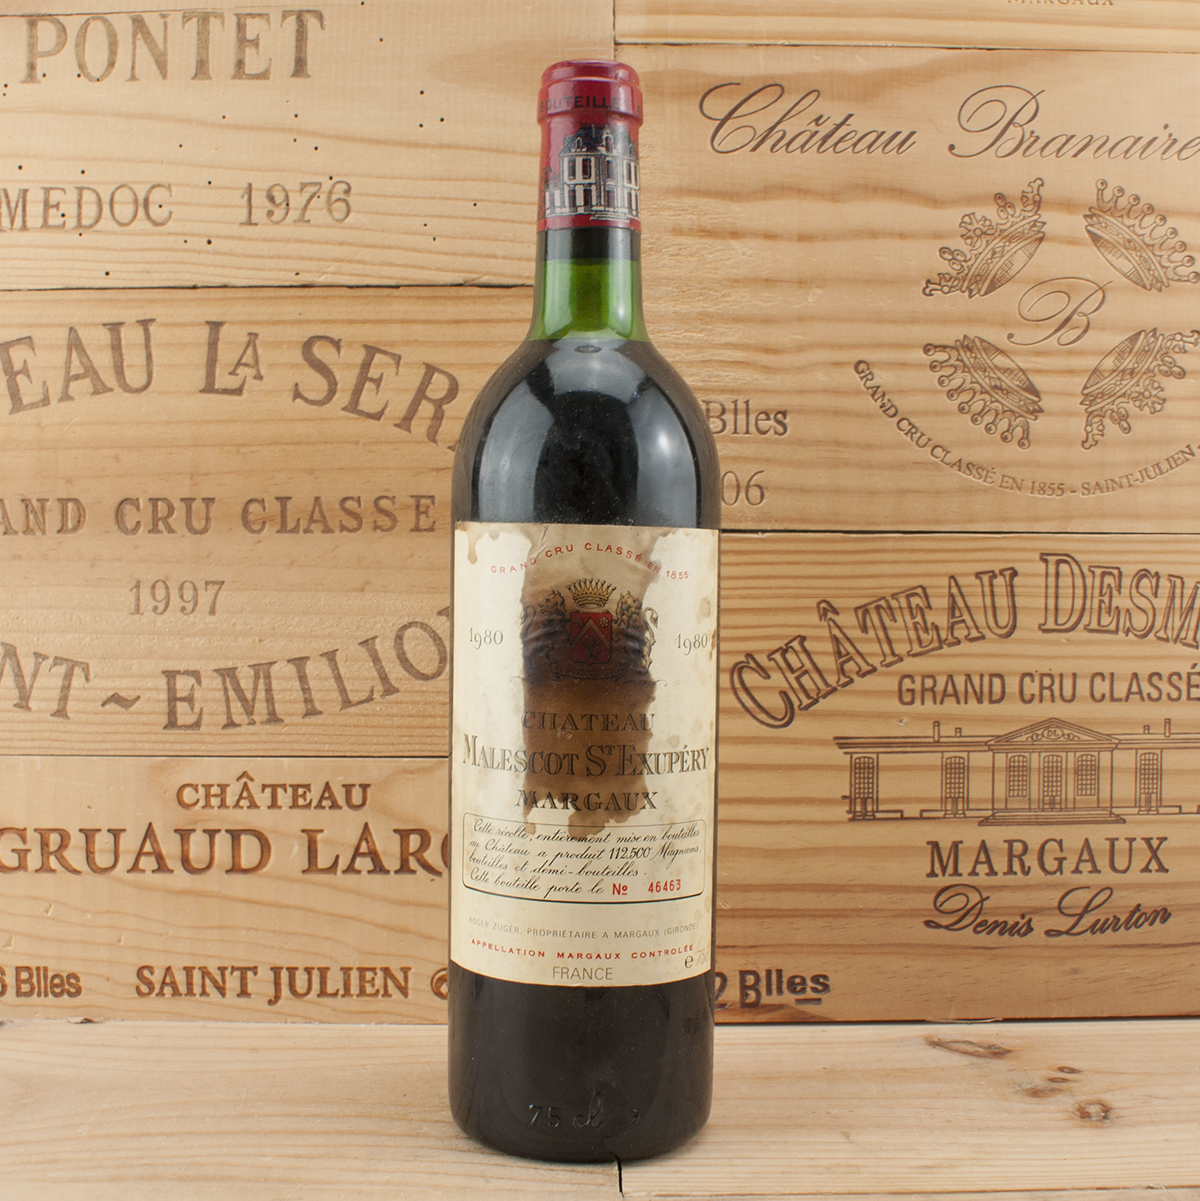 1980 Chateau Malescot St. Exupery